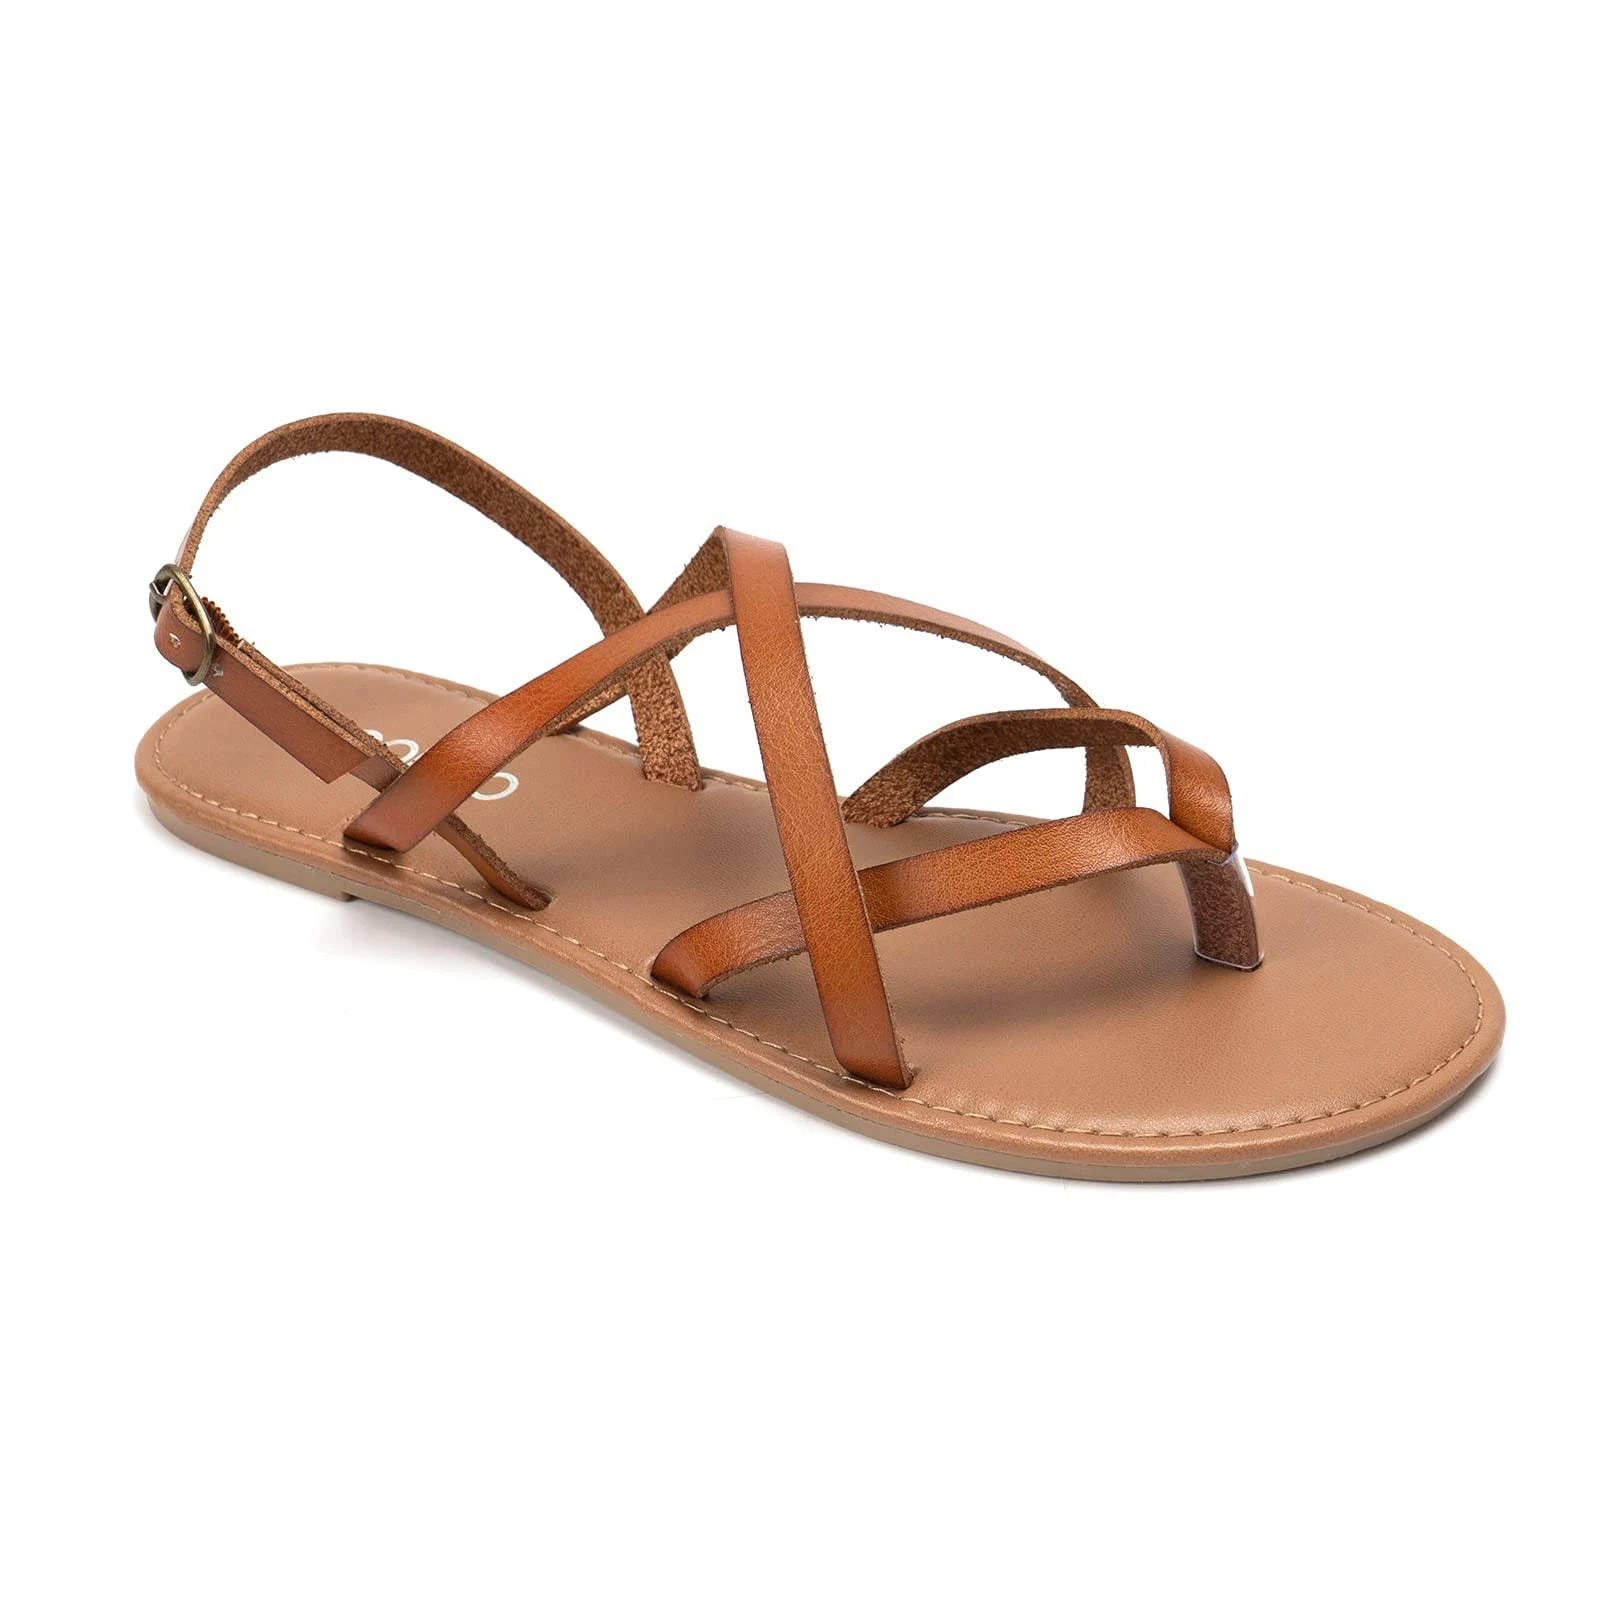 Classy Adjustable Strappy Flat Sandals for Women | Image